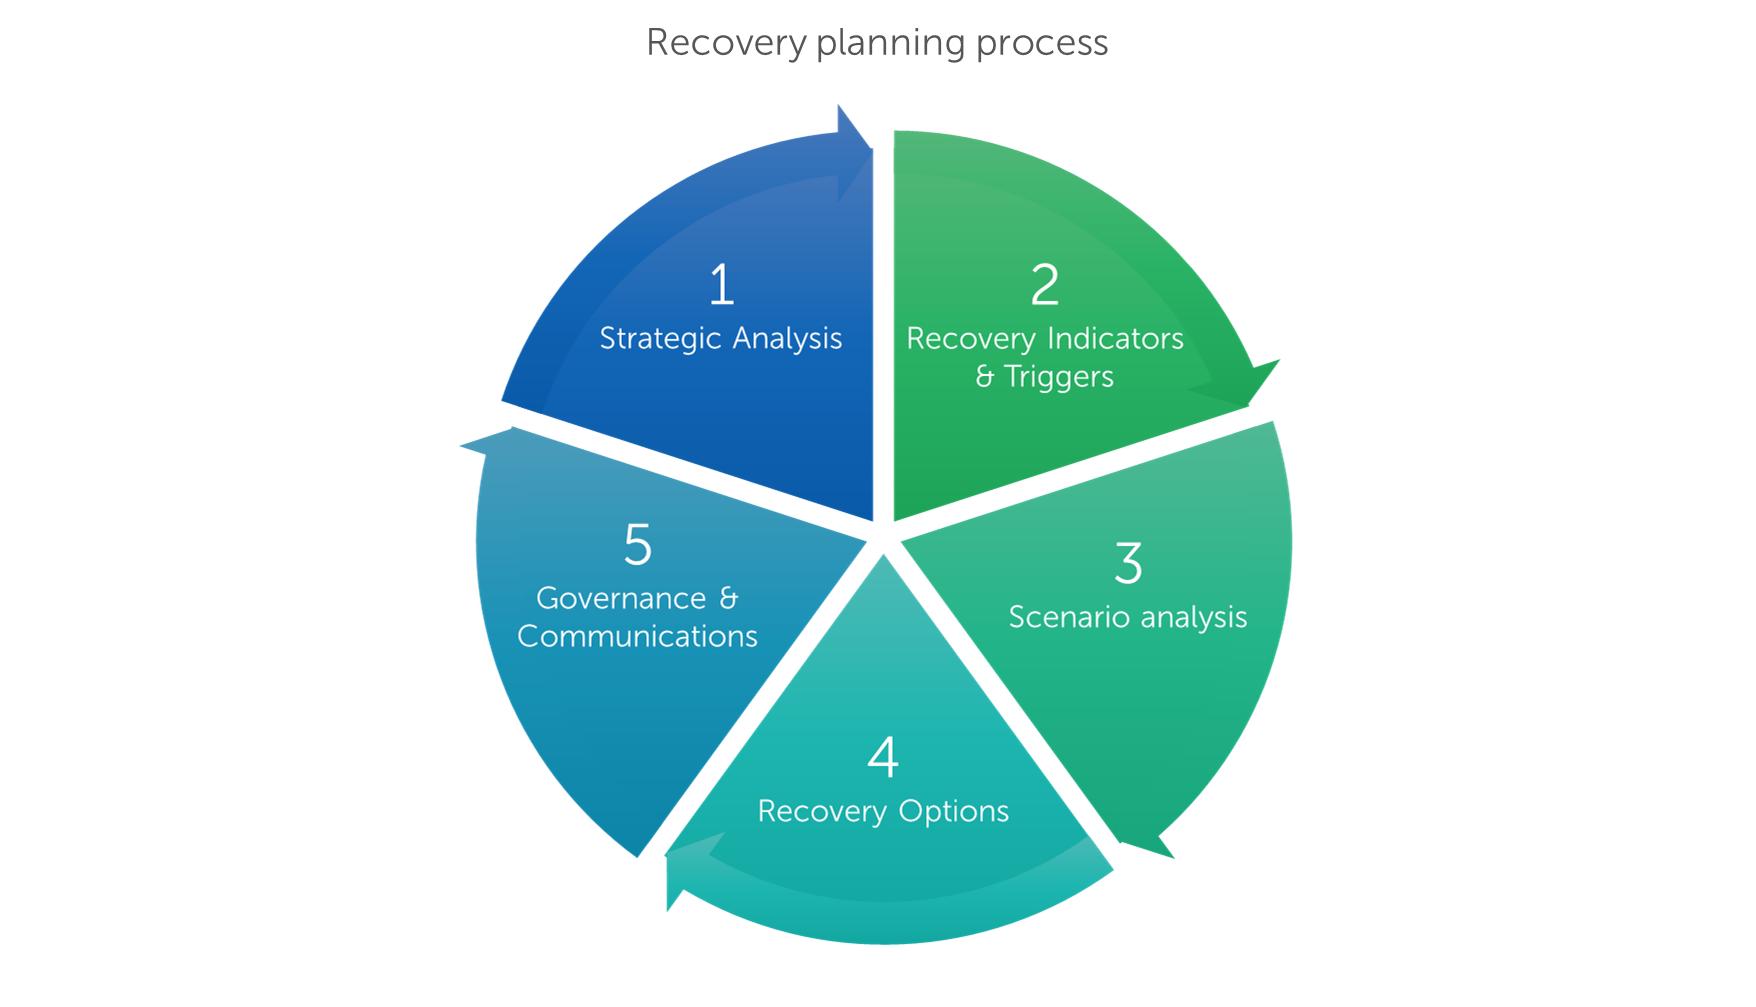 Finalyse pre-emptive recovery planning process